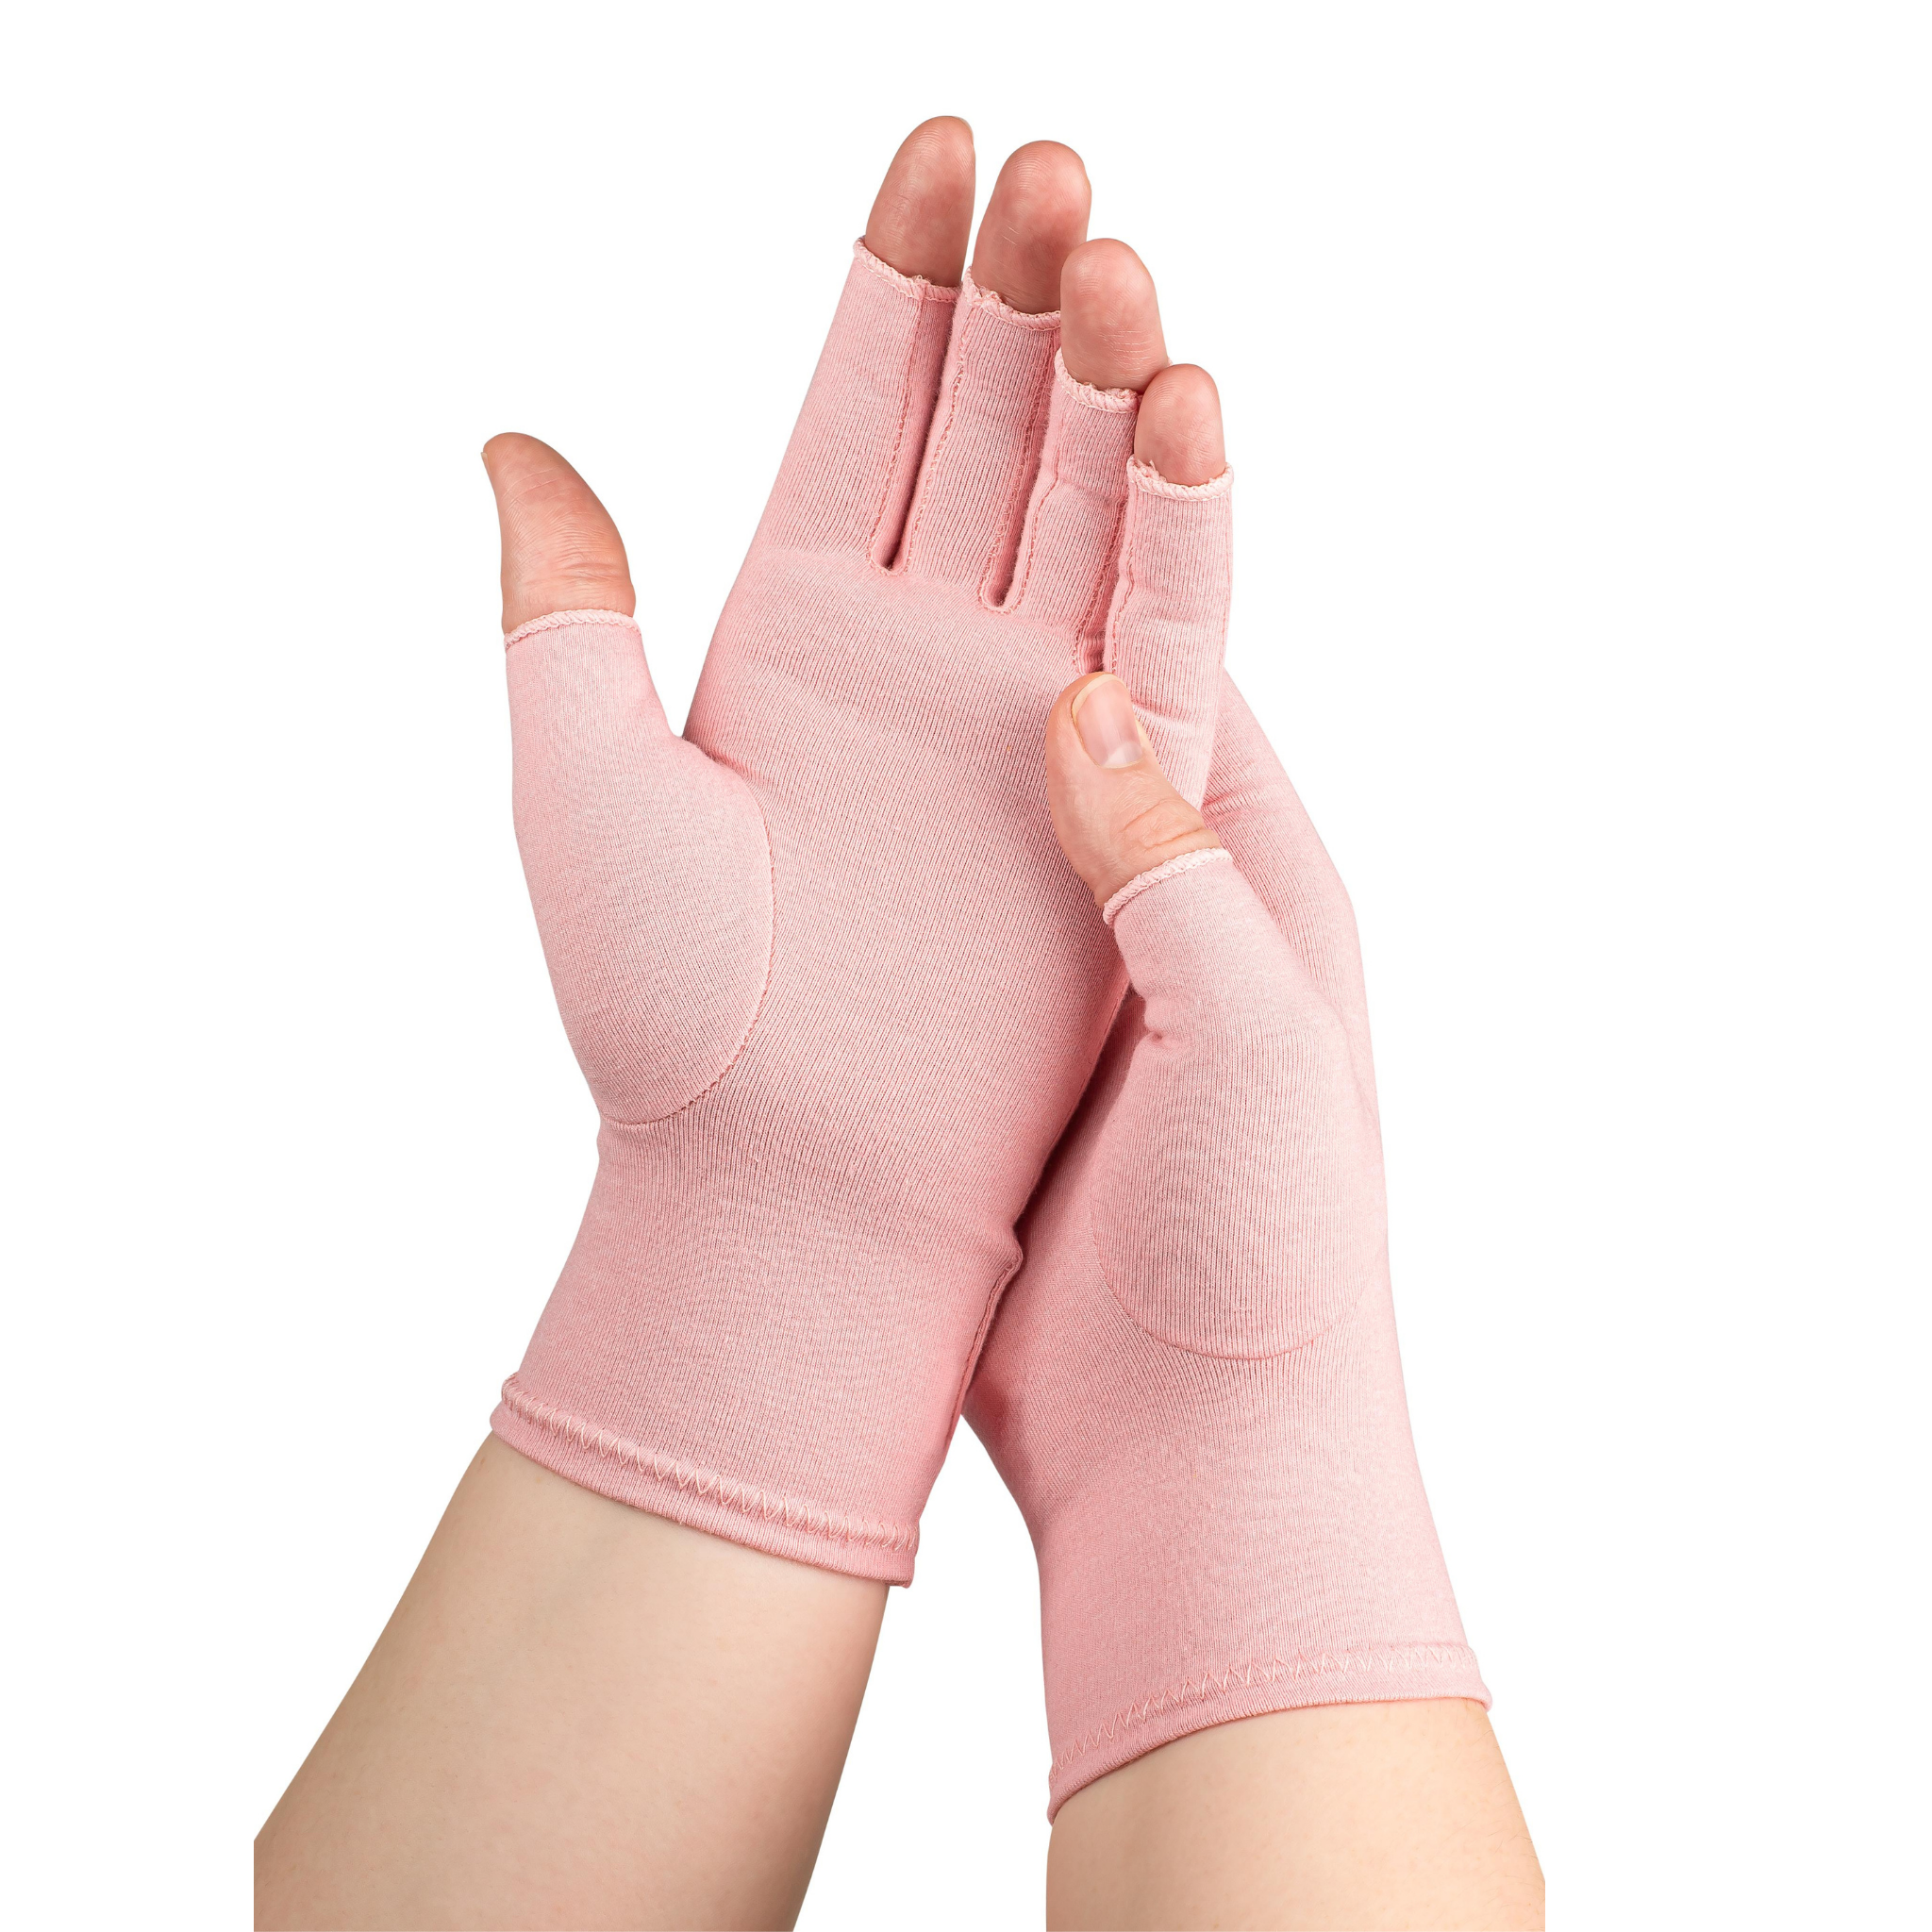 A woman with arthritis wearing Ballet Pink Compression Gloves. Her hands are crossed with palms to the front.